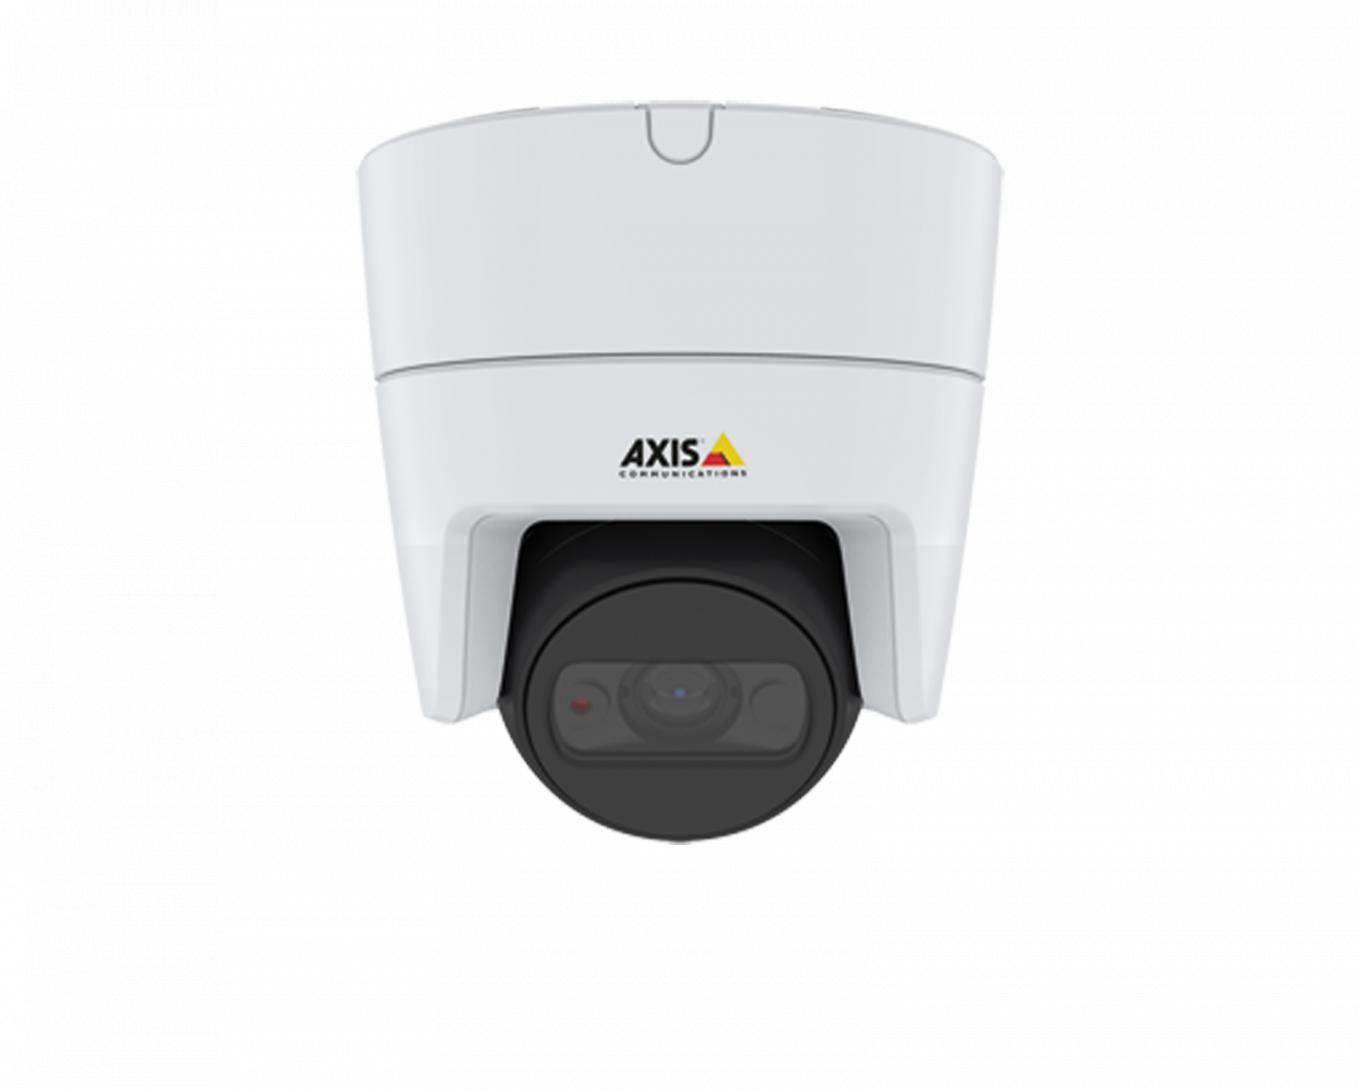 AXIS M3116-LVE Network Camera | Axis Communications